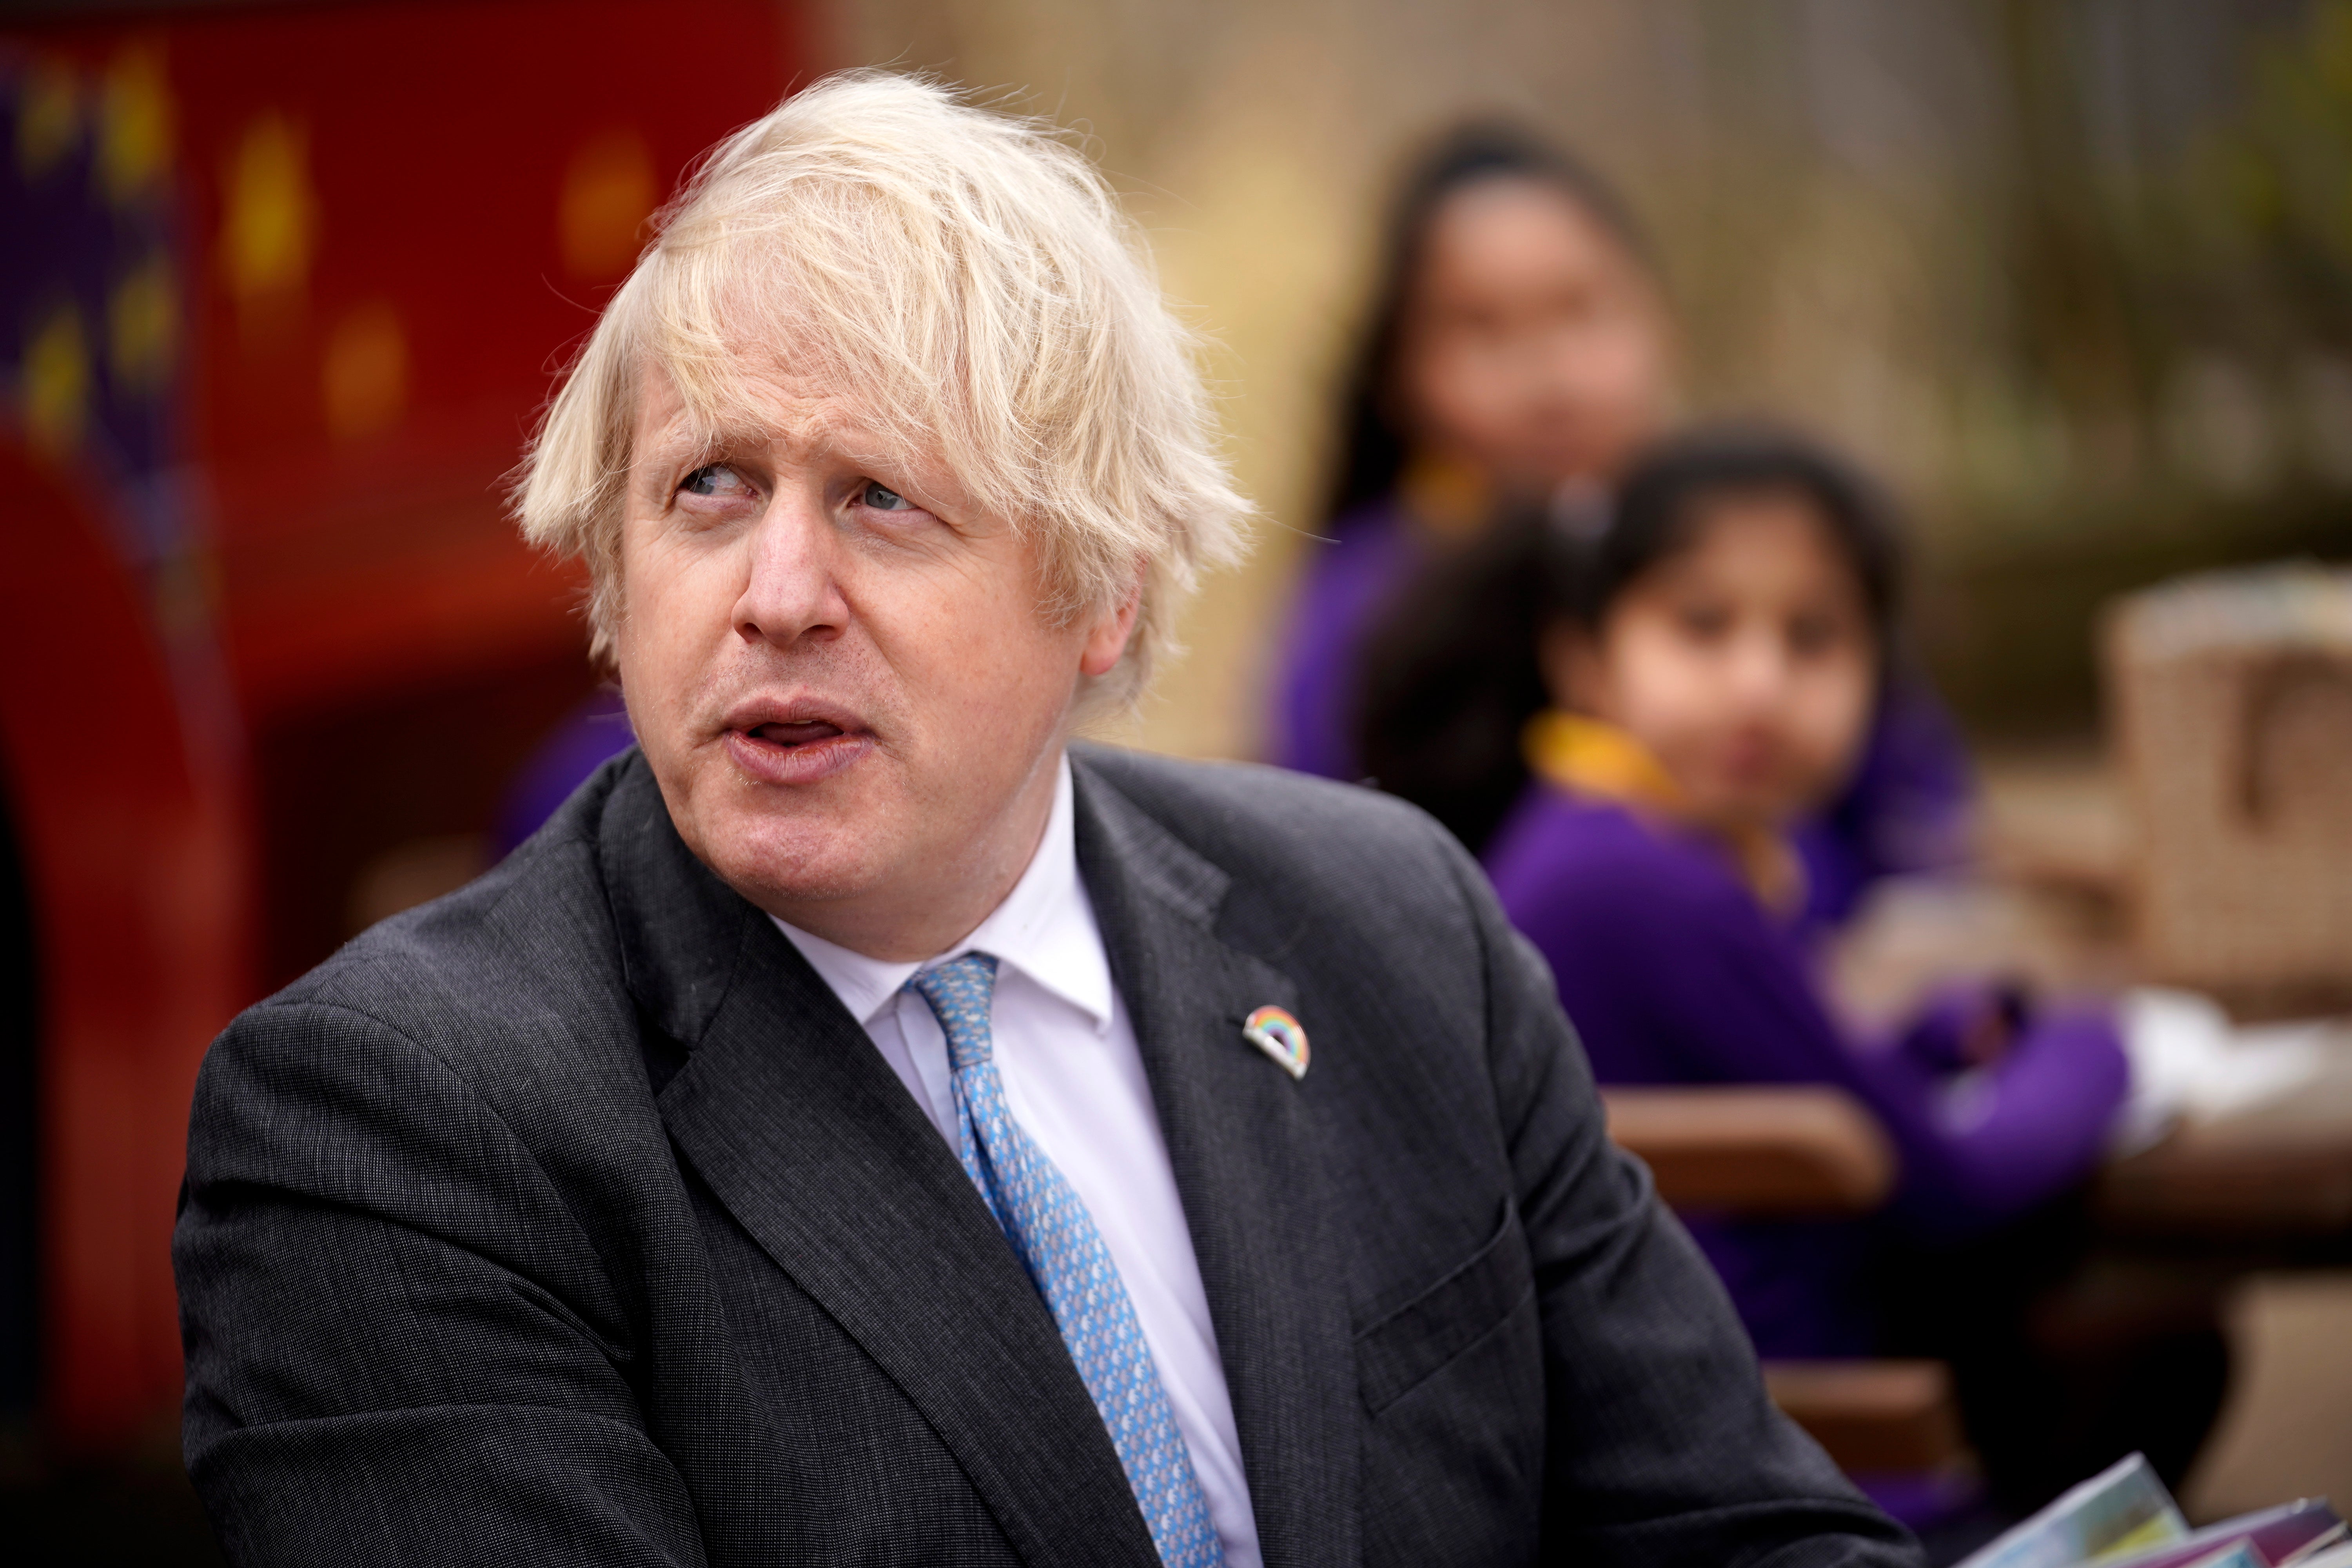 Boris Johnson’s standing has been boosted by the vaccine rollout programme